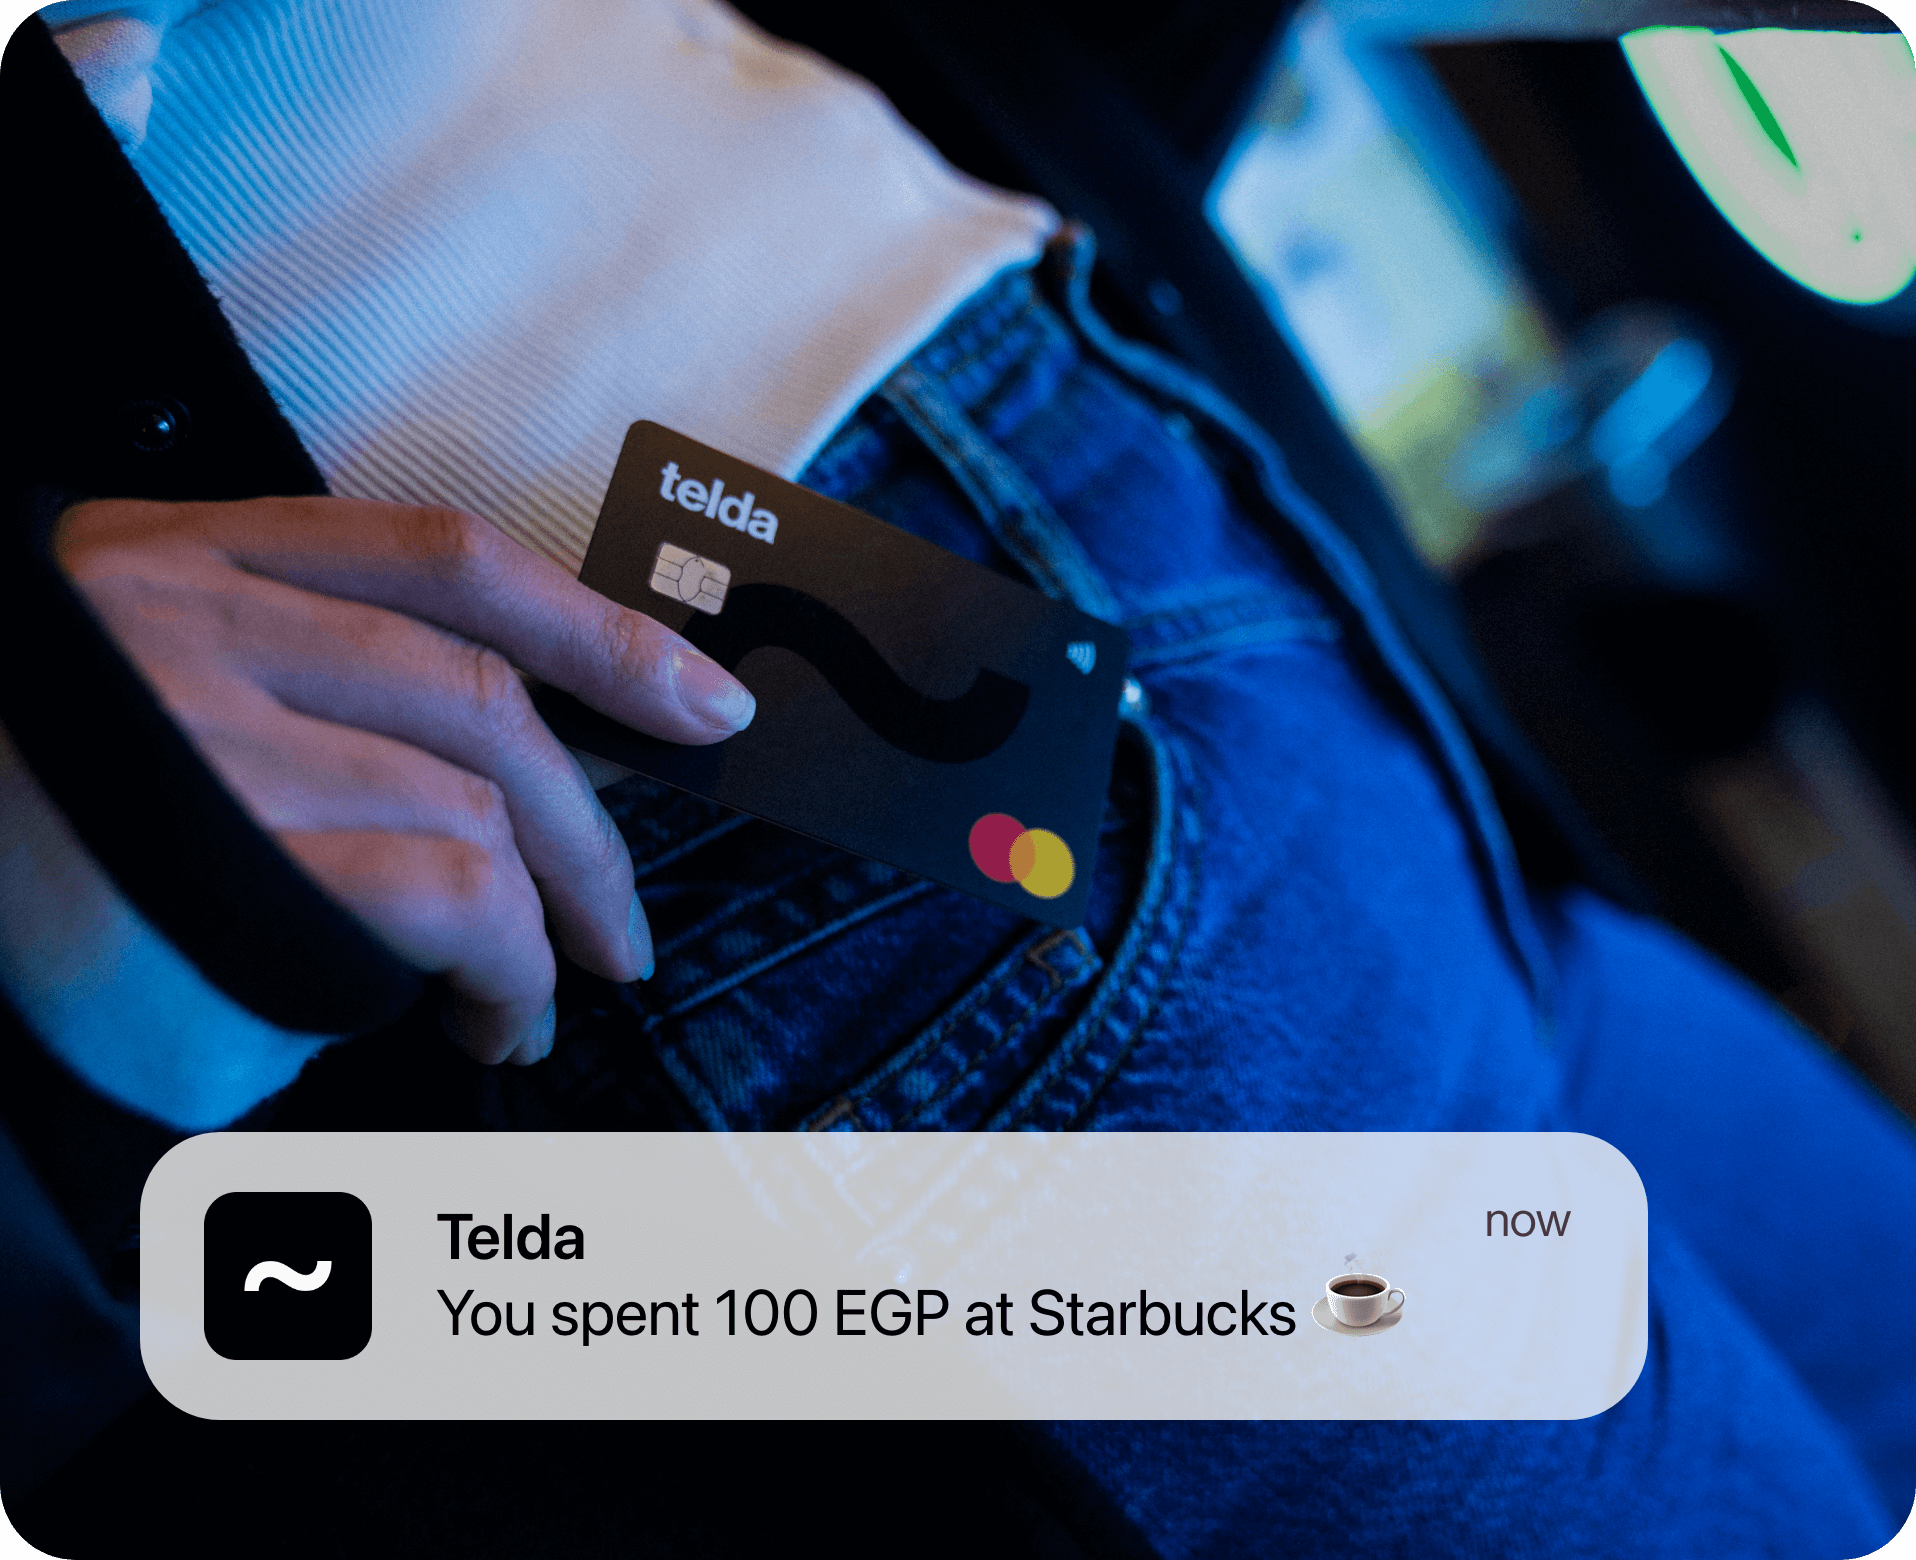 Someone is buying with his telda card on POS through contactless payments